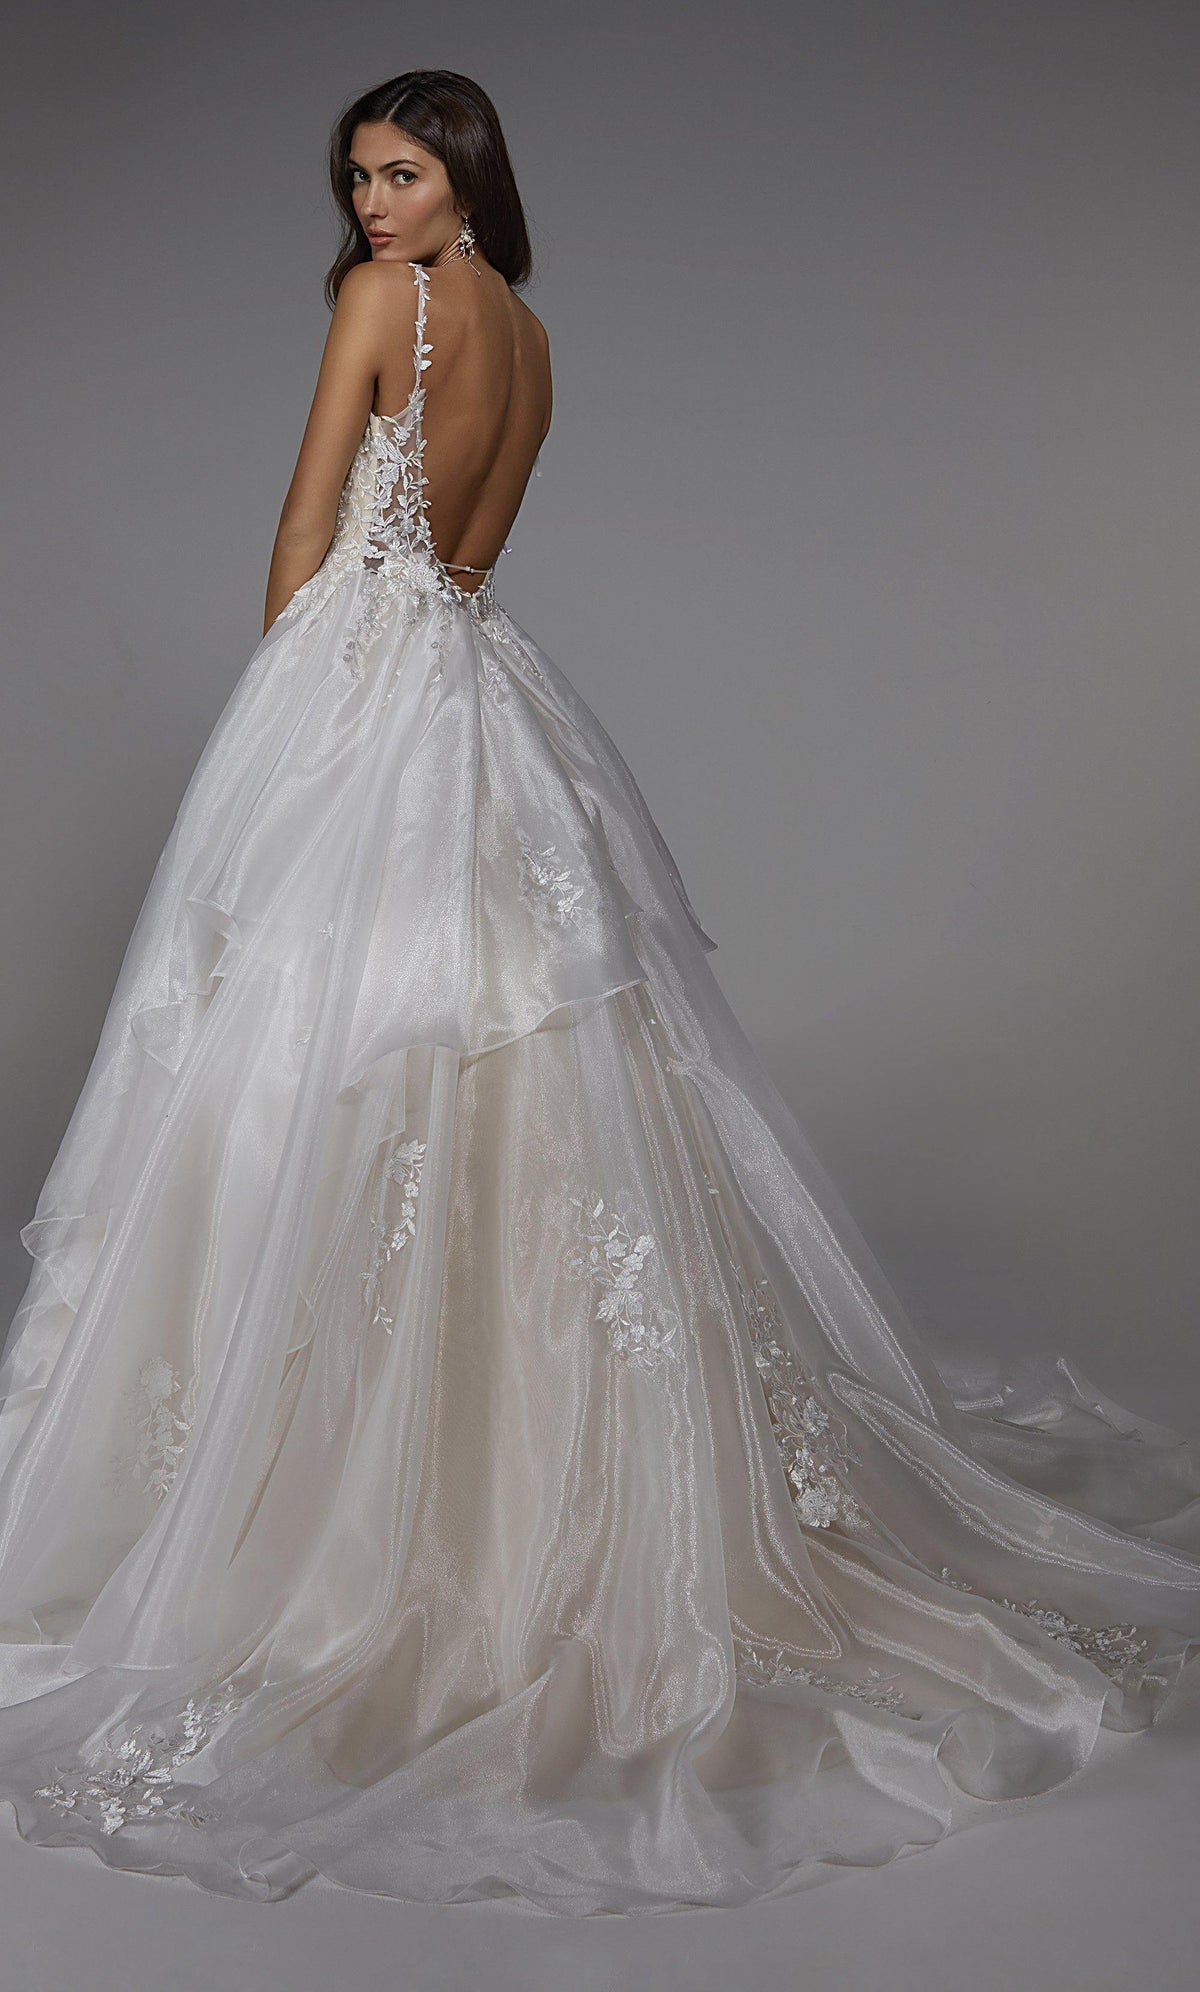 Formal Dress: 7047. Long Bridal Gown, Plunging Neckline, Ball Gown Alyce Paris